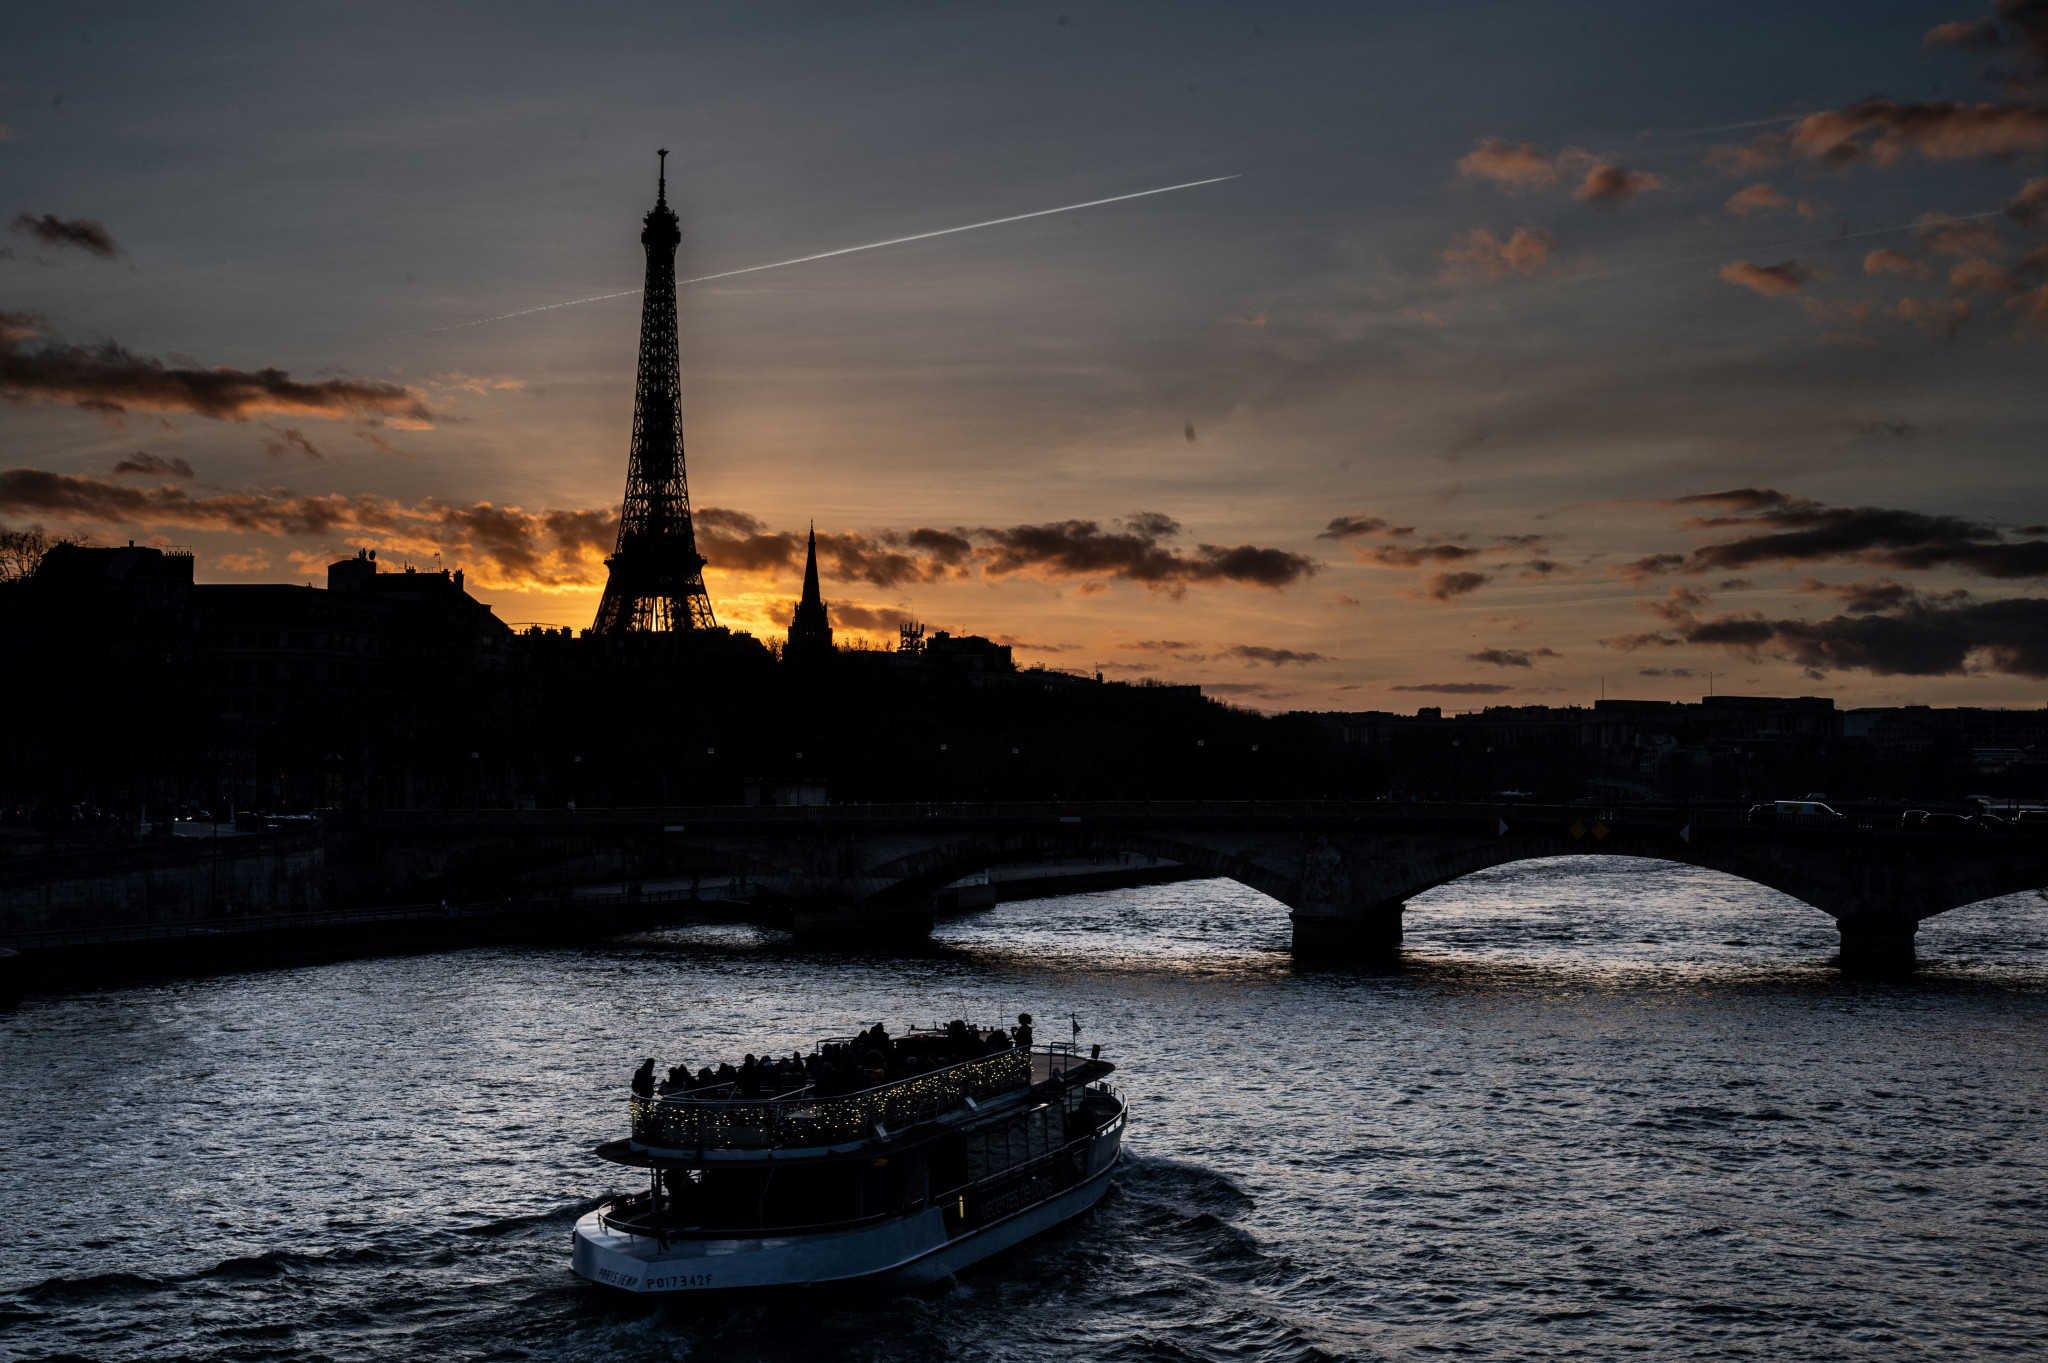 A total of 116 boats have been identified to carry athletes along the Seine at the Opening Ceremony, with 140 to 170 likely to be required ©Getty Images